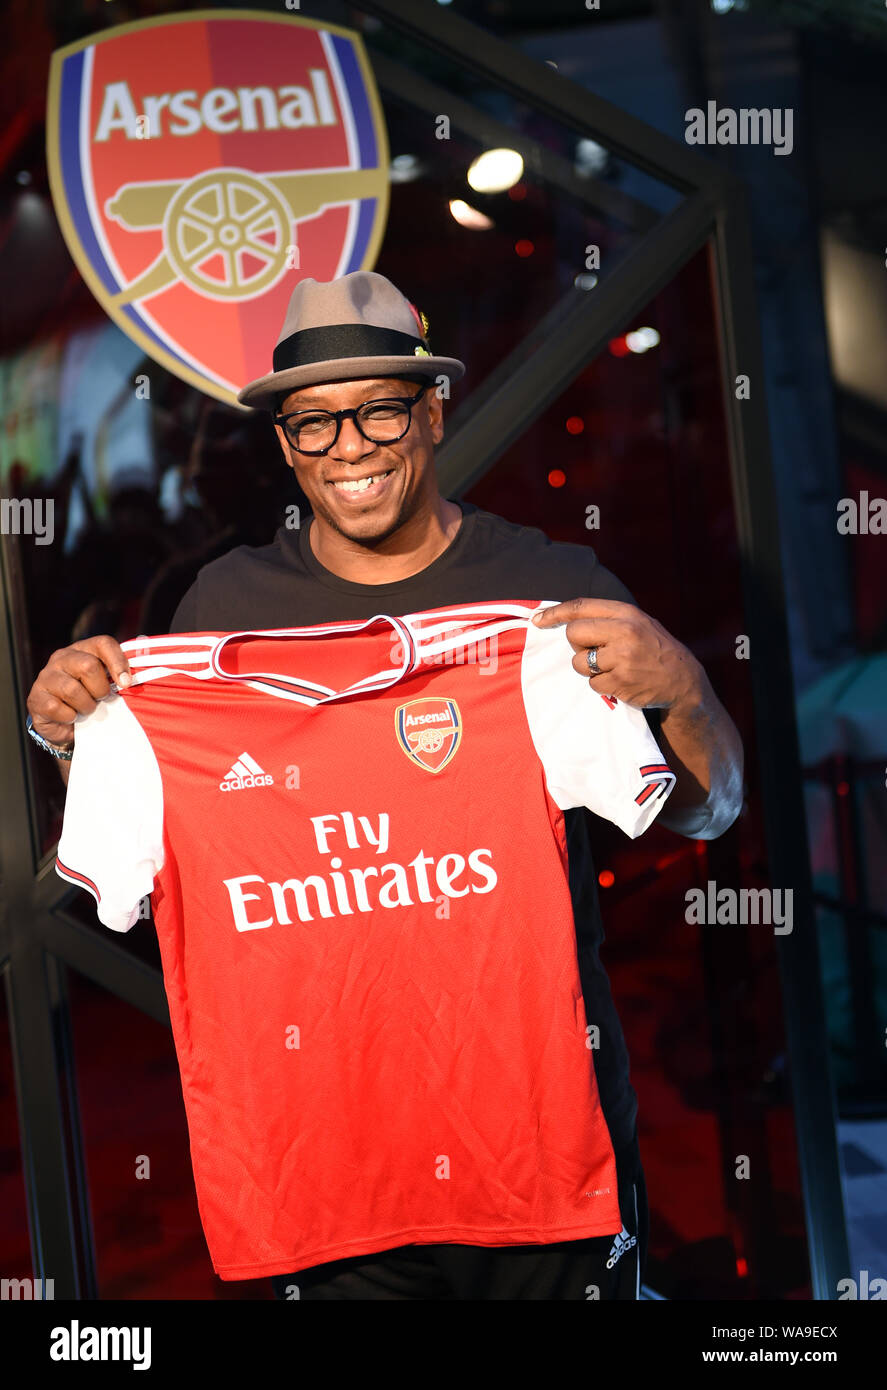 Former English football player Ian Wright attends a promotional event for  new team jersey of Arsenal F.C. of English football league system at a  sport Stock Photo - Alamy